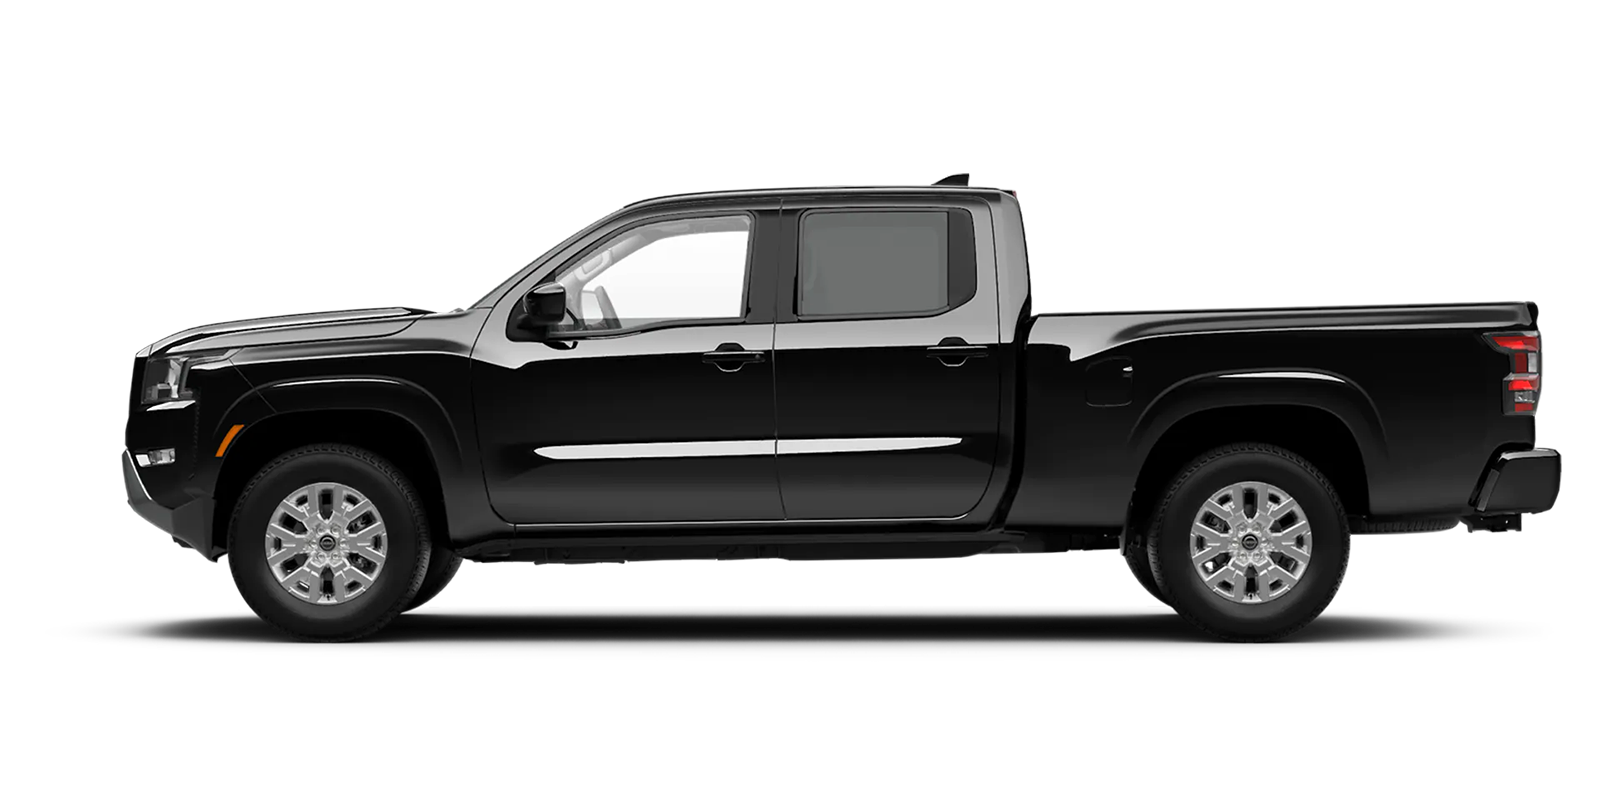 2022 Frontier Crew Cab Long Bed SV 4x2 in Super Black | Carlock Nissan Of Tupelo in Tupelo MS